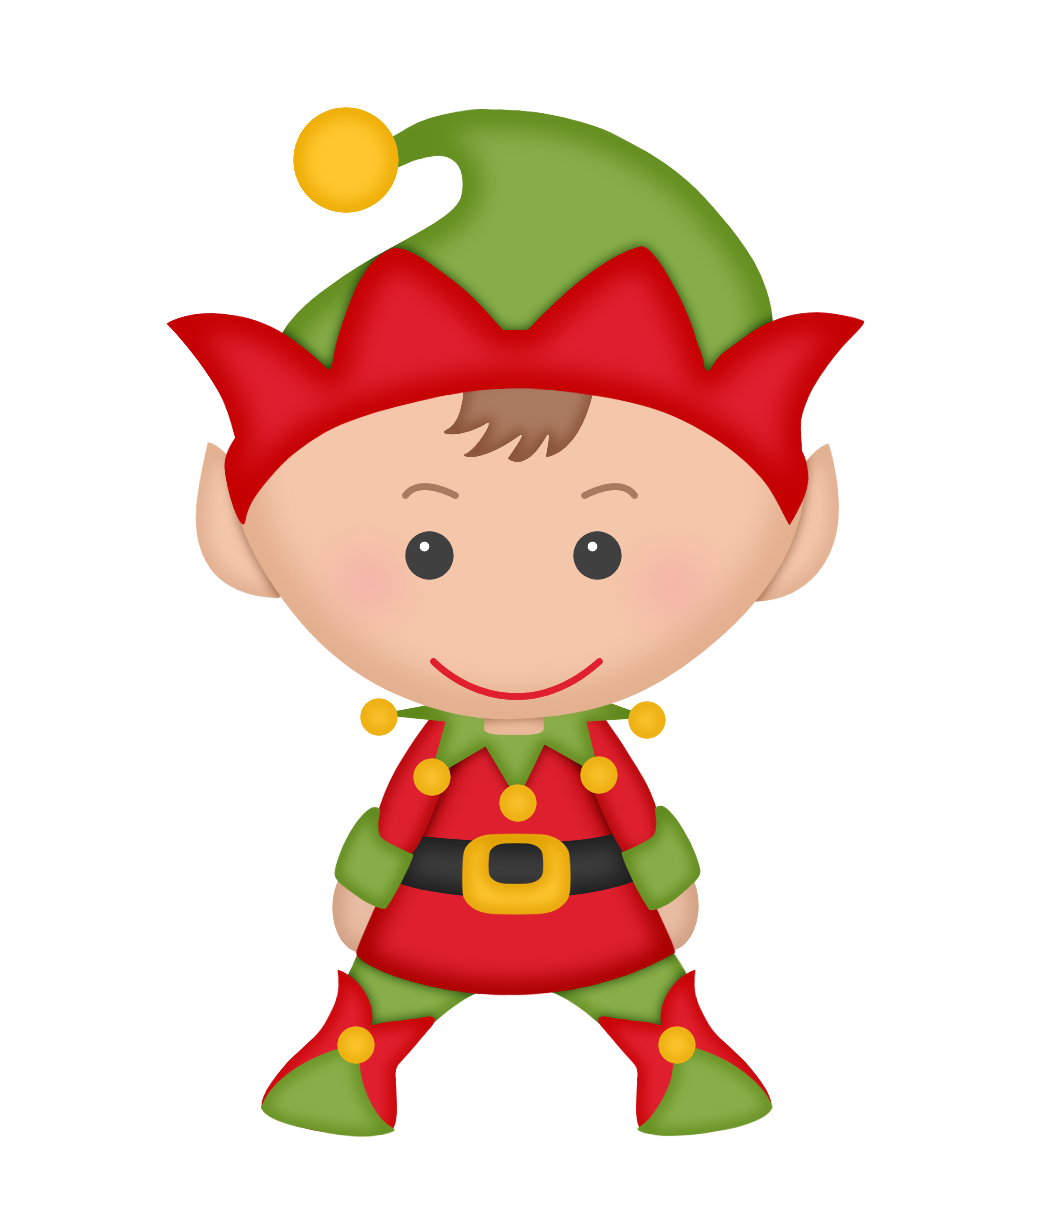 Elf clipart toy, Elf toy Transparent FREE for download on